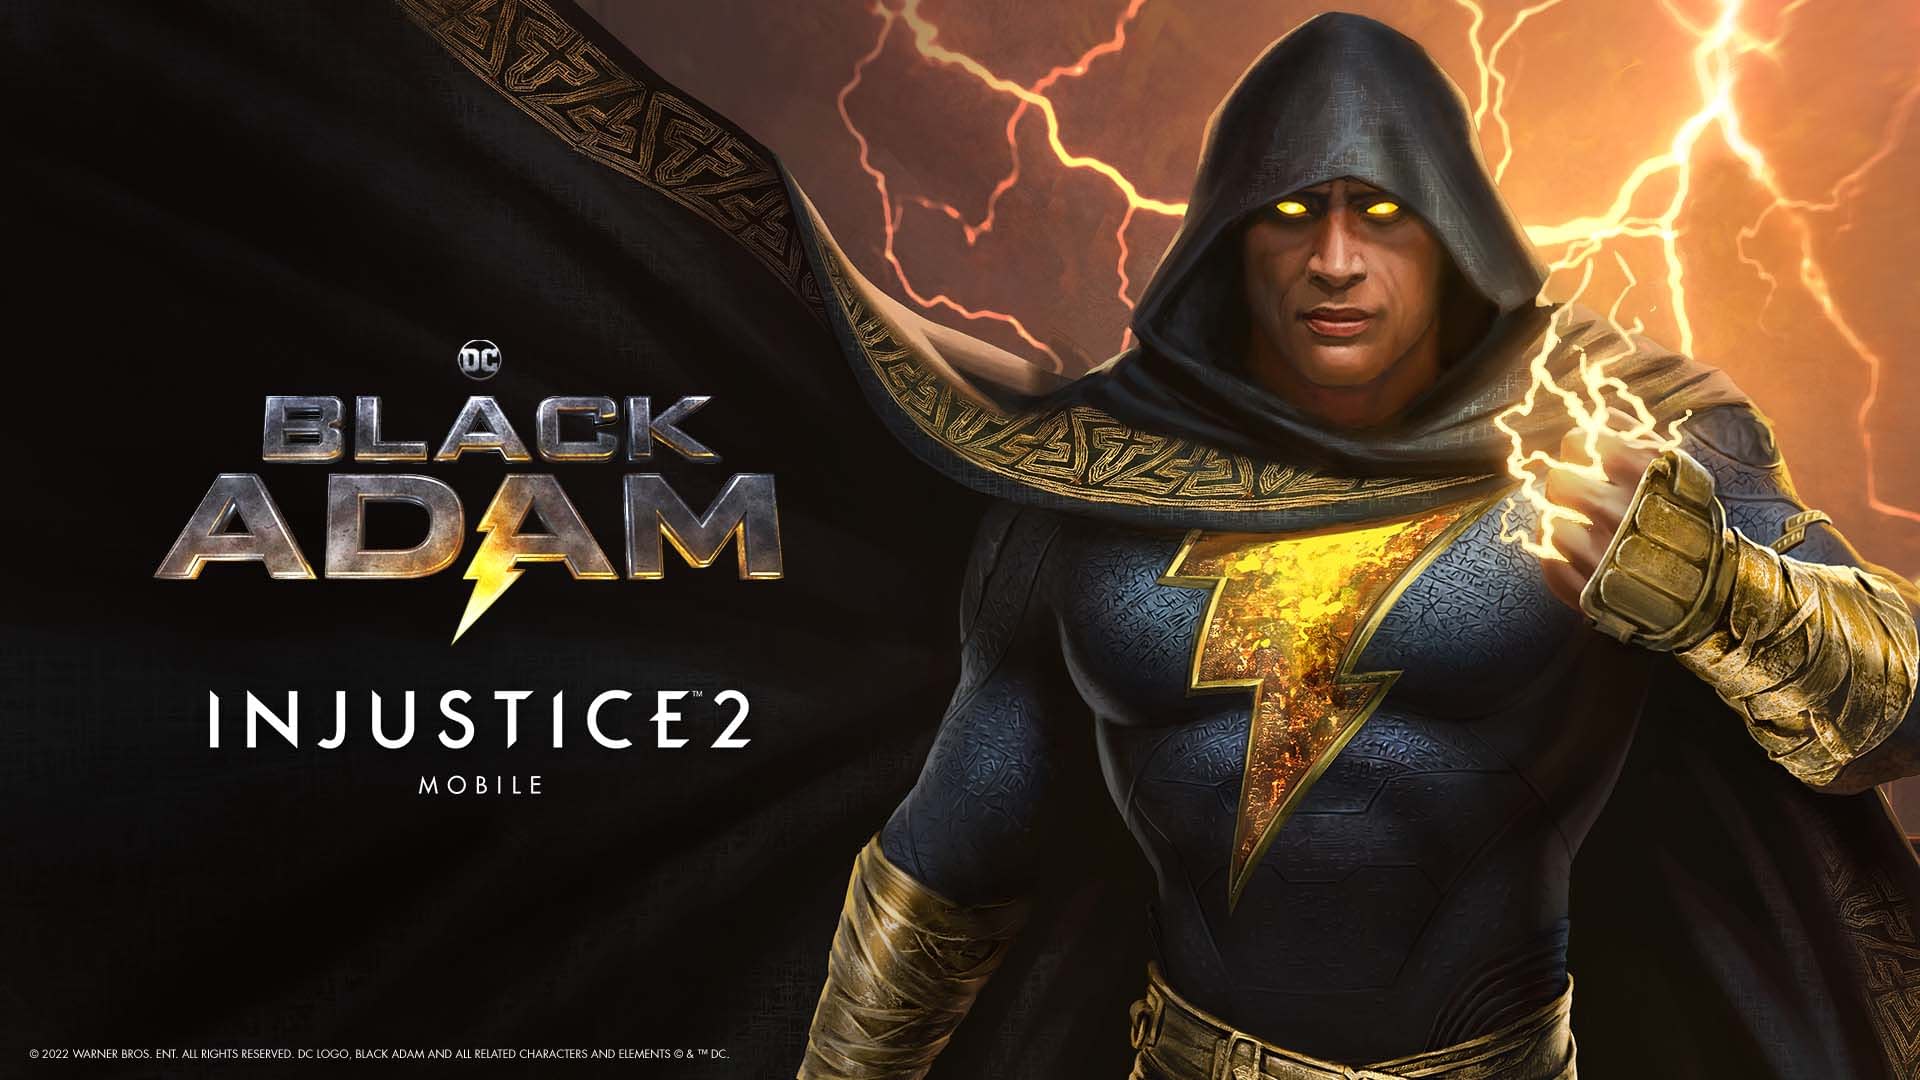 Injustice 2 Mobile Adds Black Adam In Time For The Film